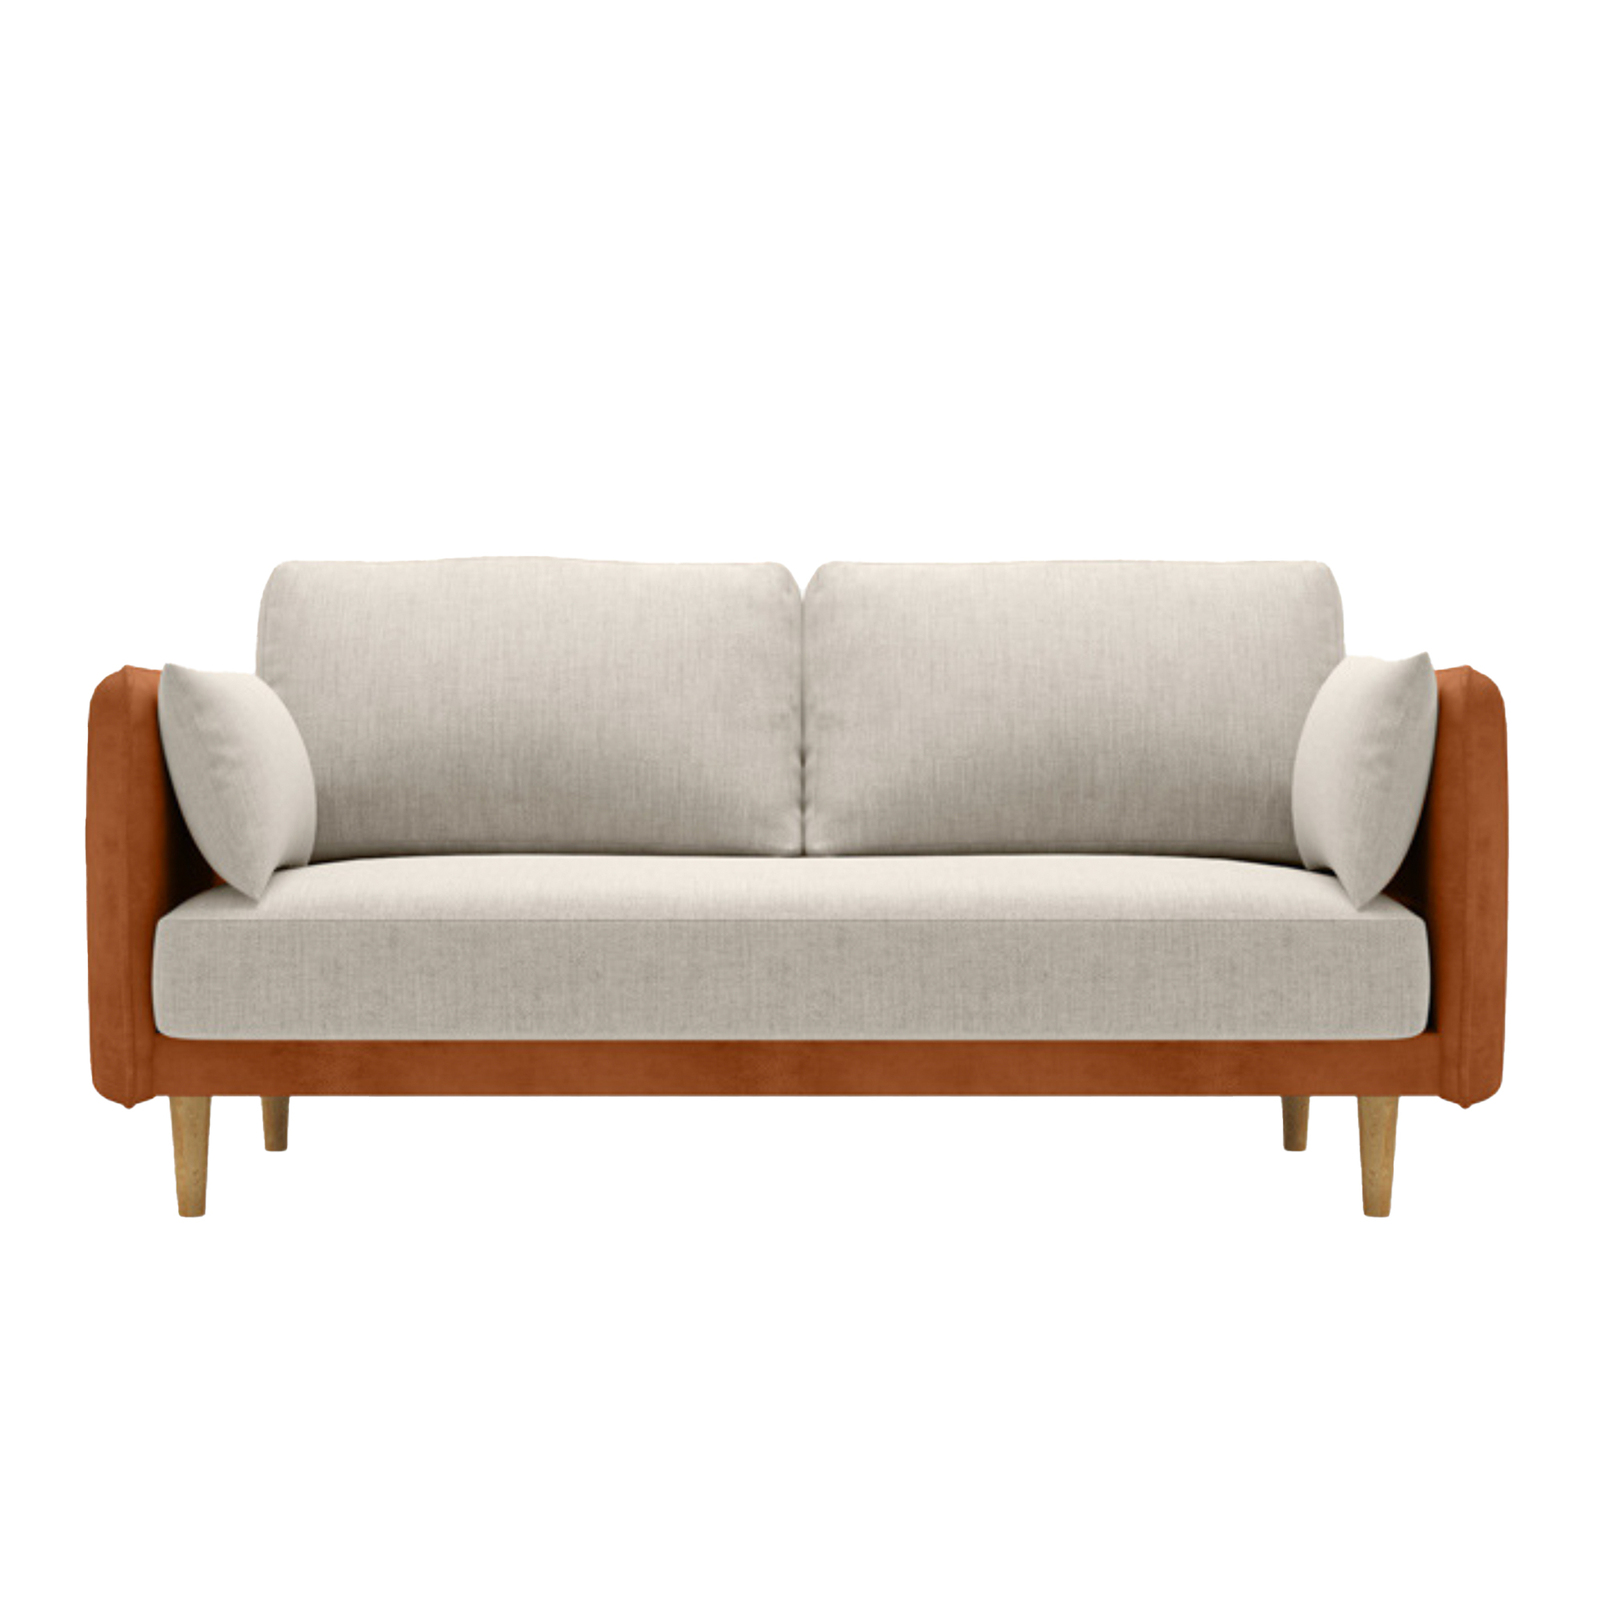 Modern Sofa Large Double 2-3 Seater Couch - White and Orange